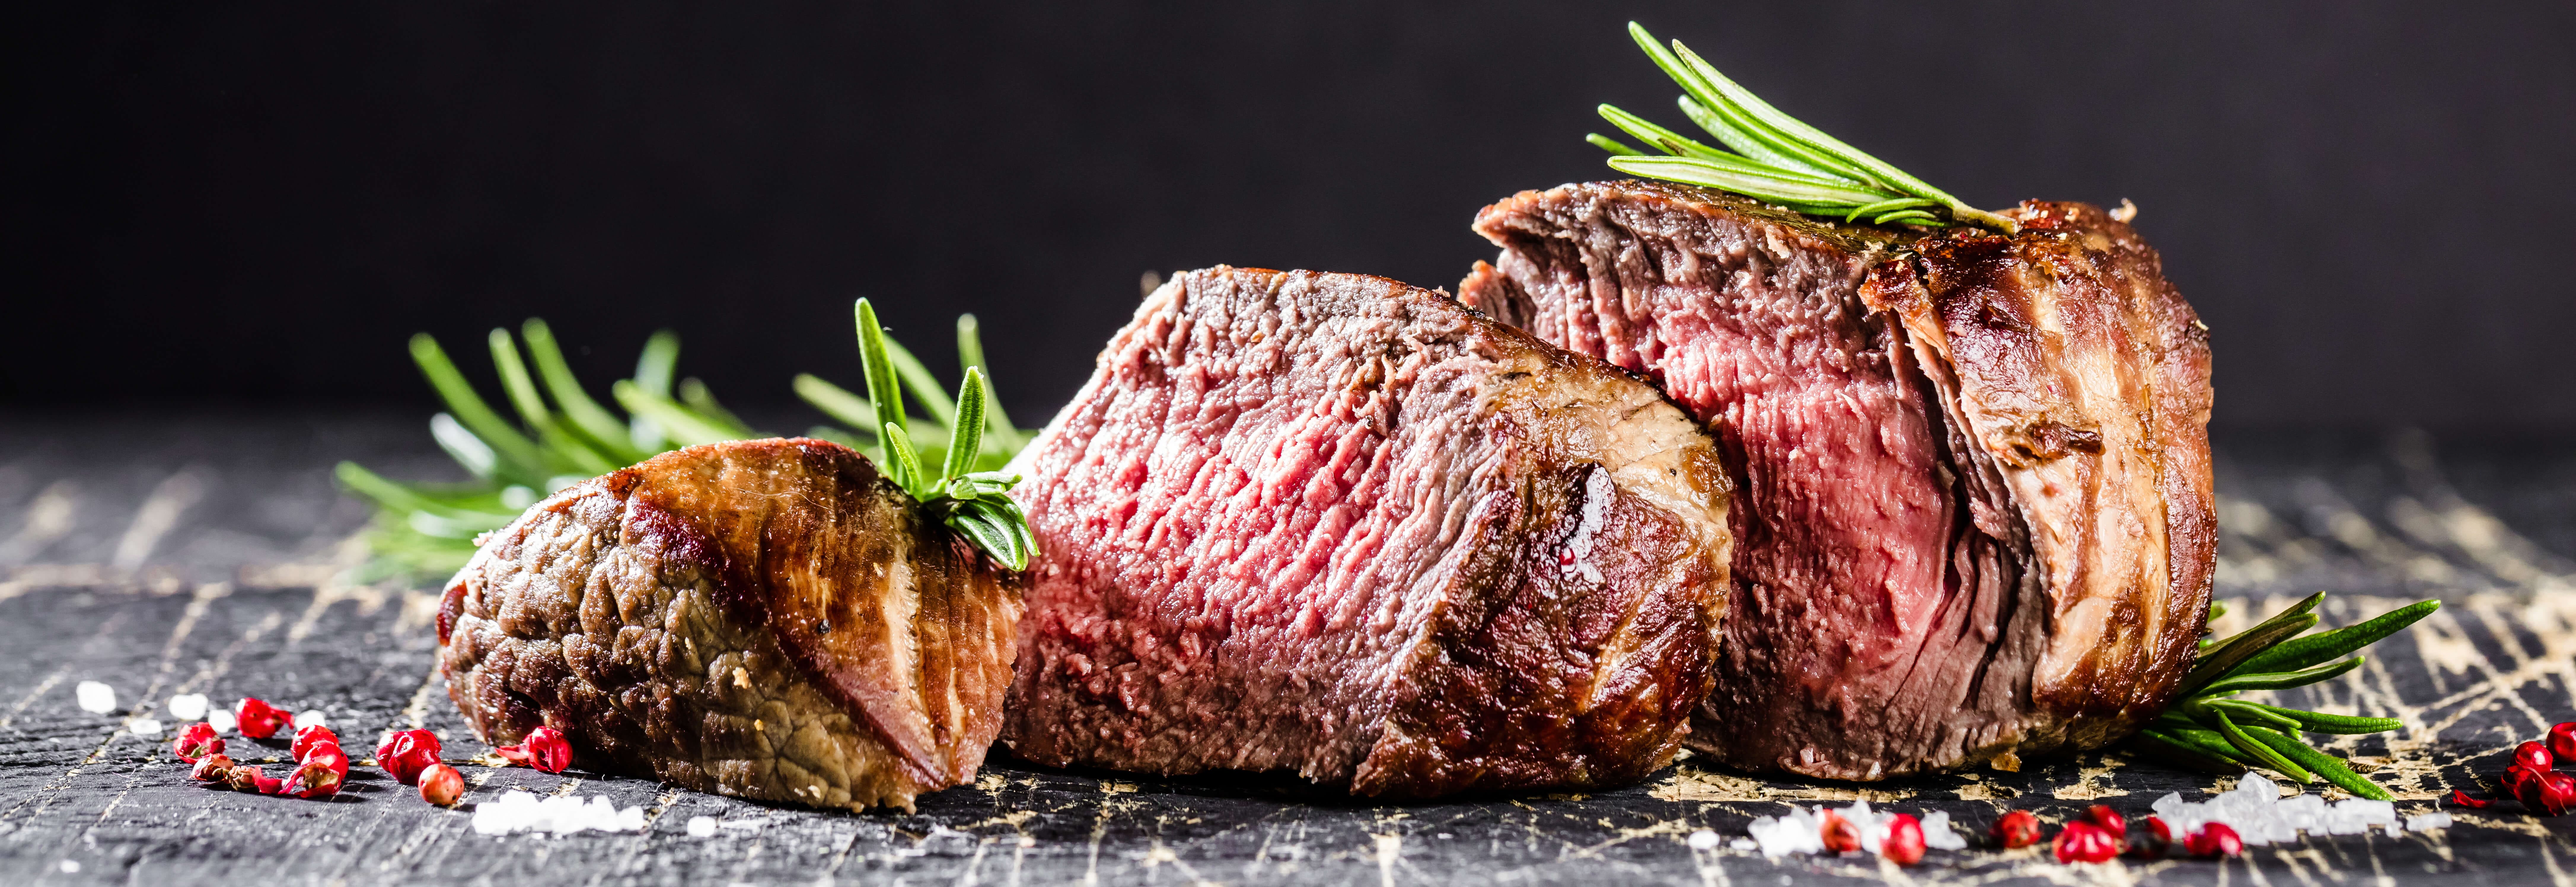 Celebrate the New Year with Tenderloin Steaks